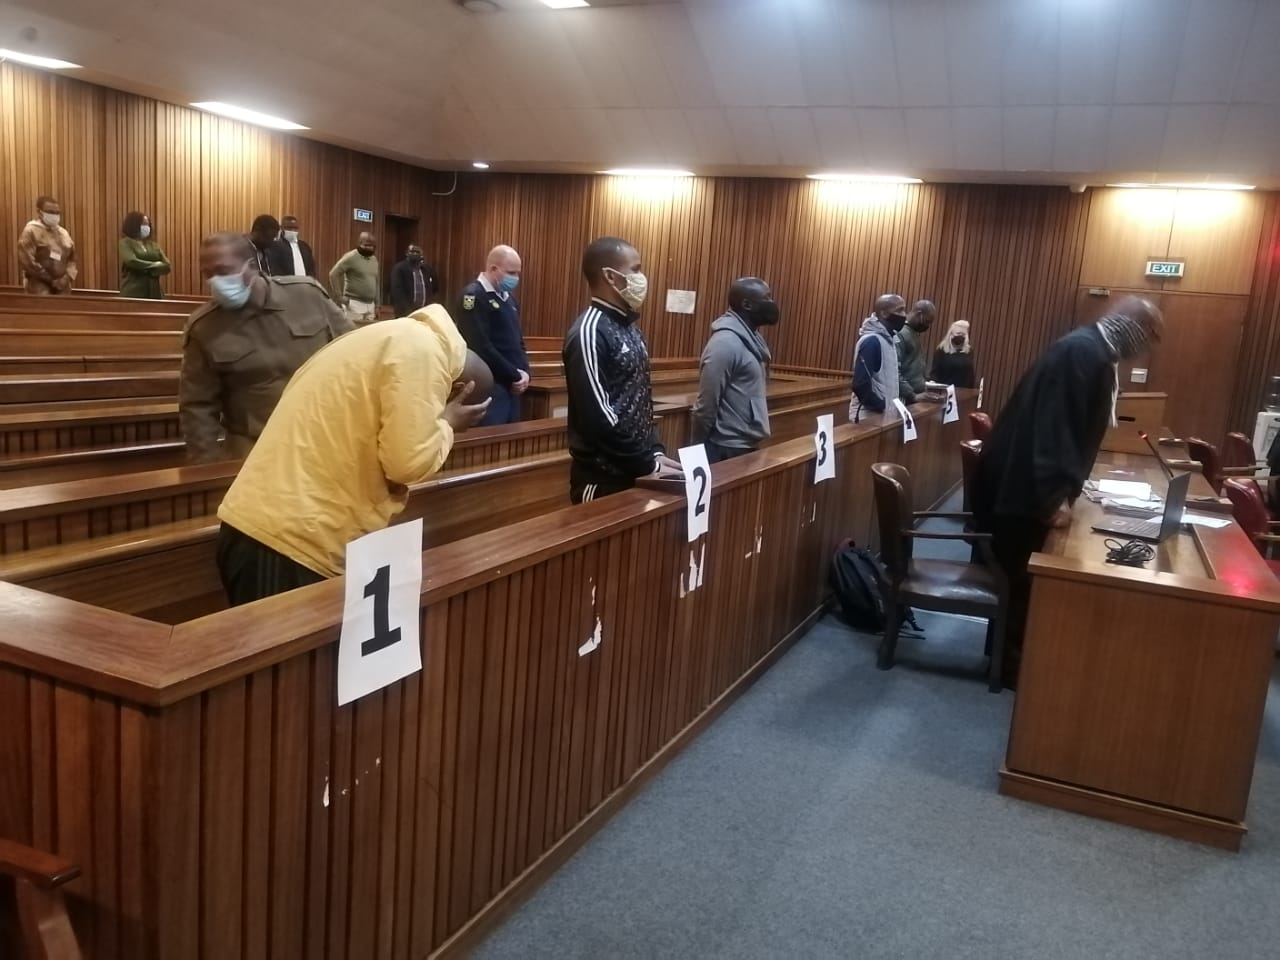 Five men sentenced to more than 175 years imprisonment